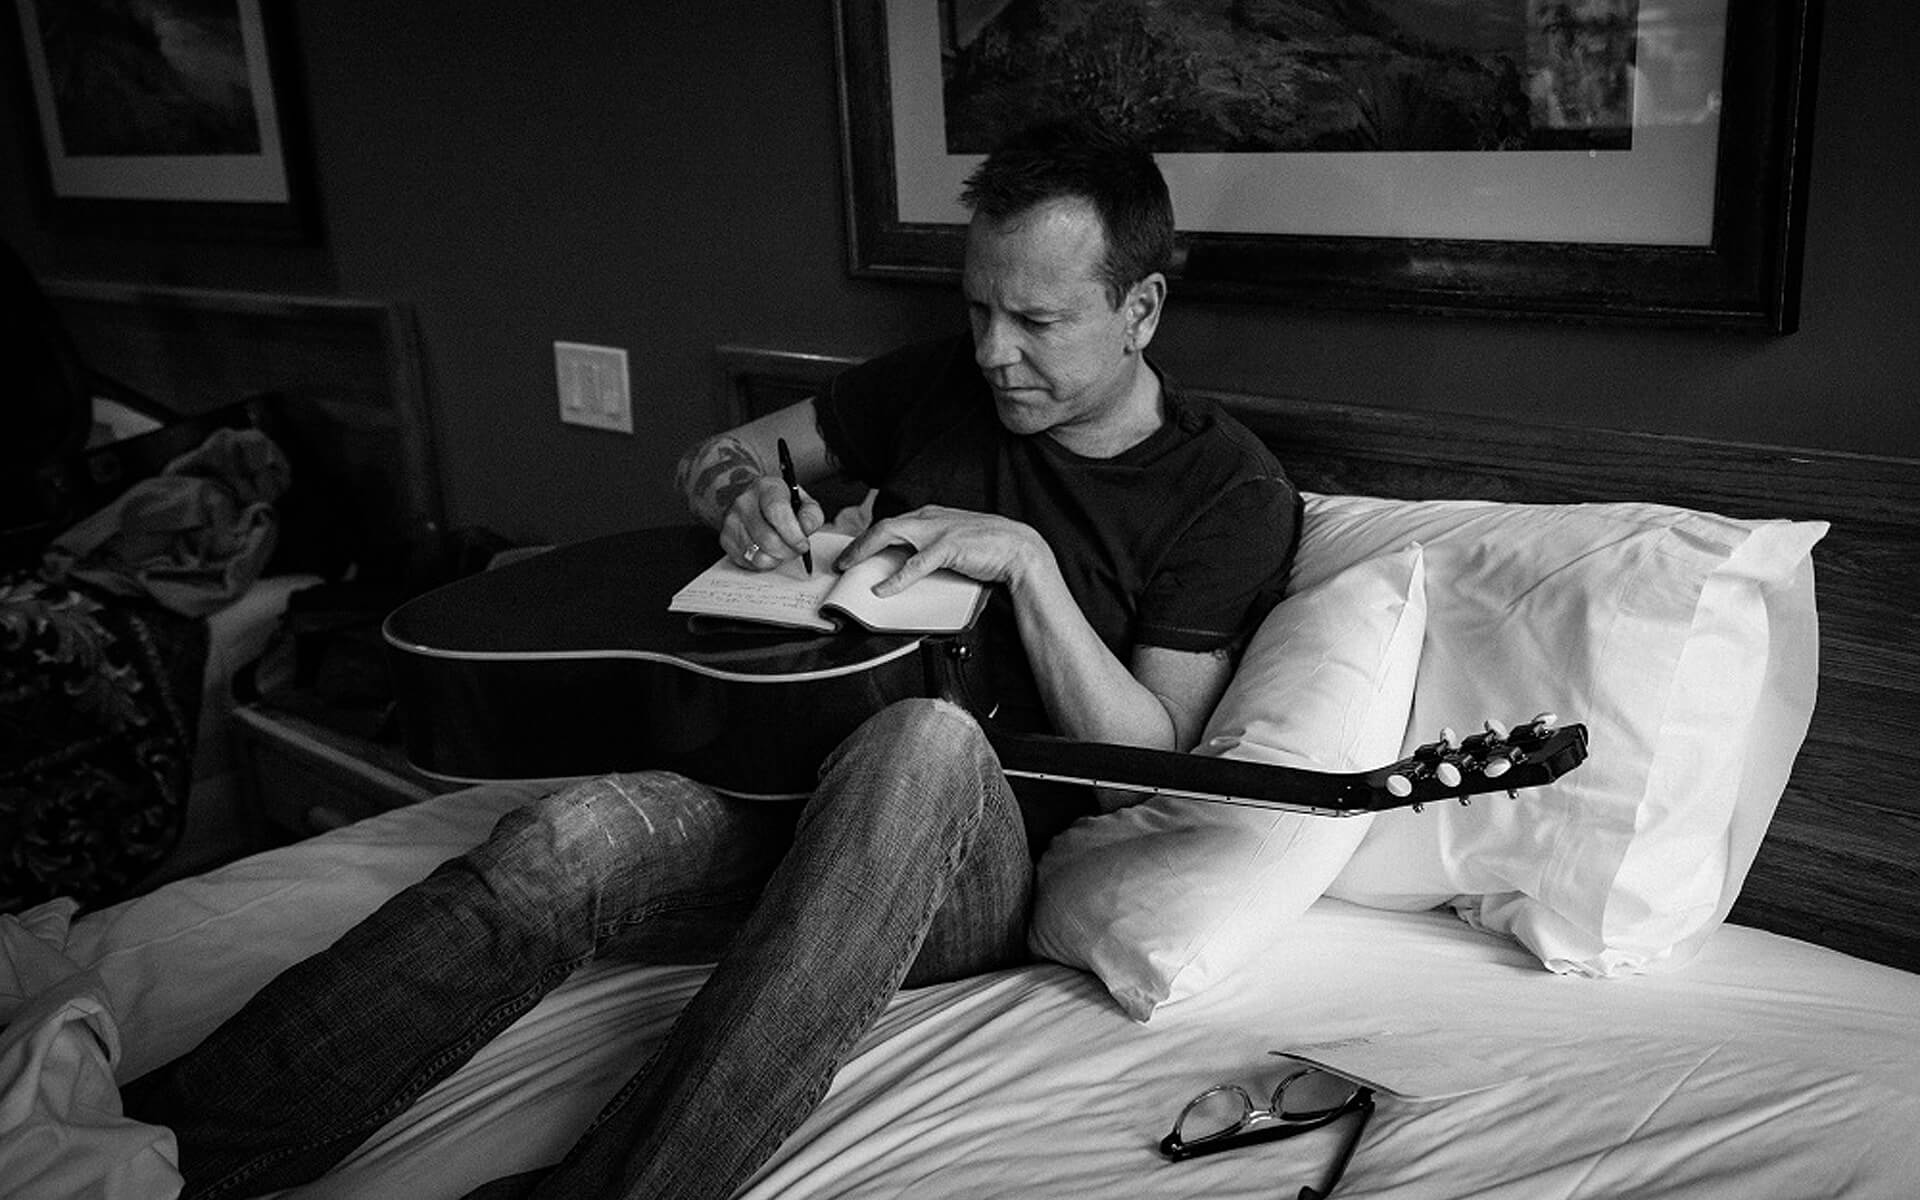 Conversations: An Exclusive With Kiefer Sutherland